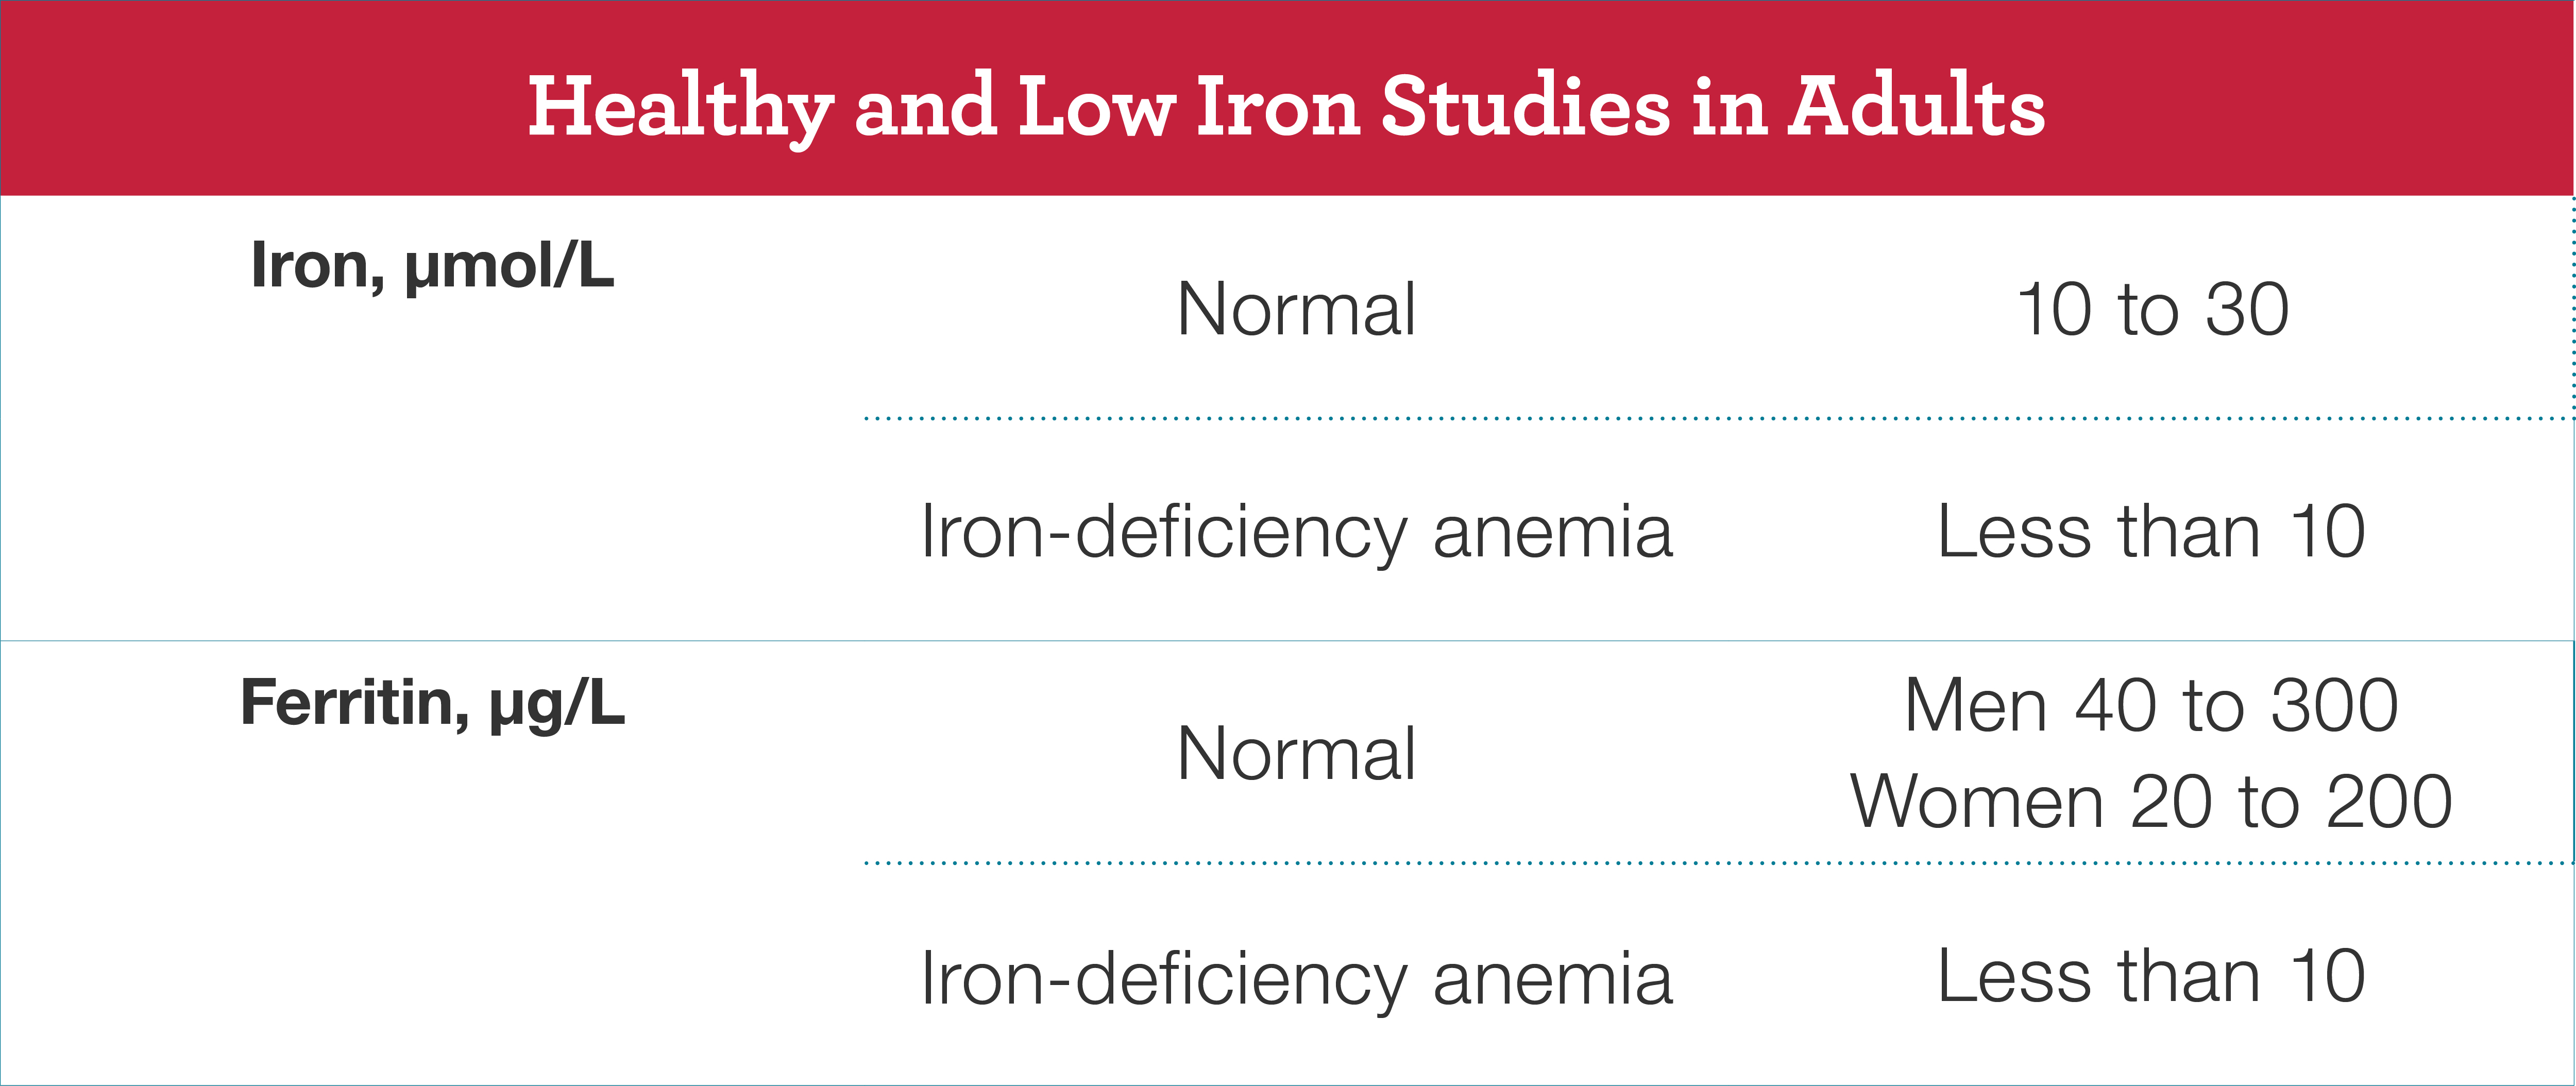 Different tests help your doctor diagnose iron-deficiency anemia. In iron-deficiency anemia, blood levels of iron will be low, or less than 10 micromoles per liter (mol/L) for both men and women. Normal levels are 10 to 30 mol/L. Levels of ferritin will also be low, or less than 10 micrograms per liter (g/L) for both men and women. Normal levels are 40 to 300 for men and 20 to 200 for women.